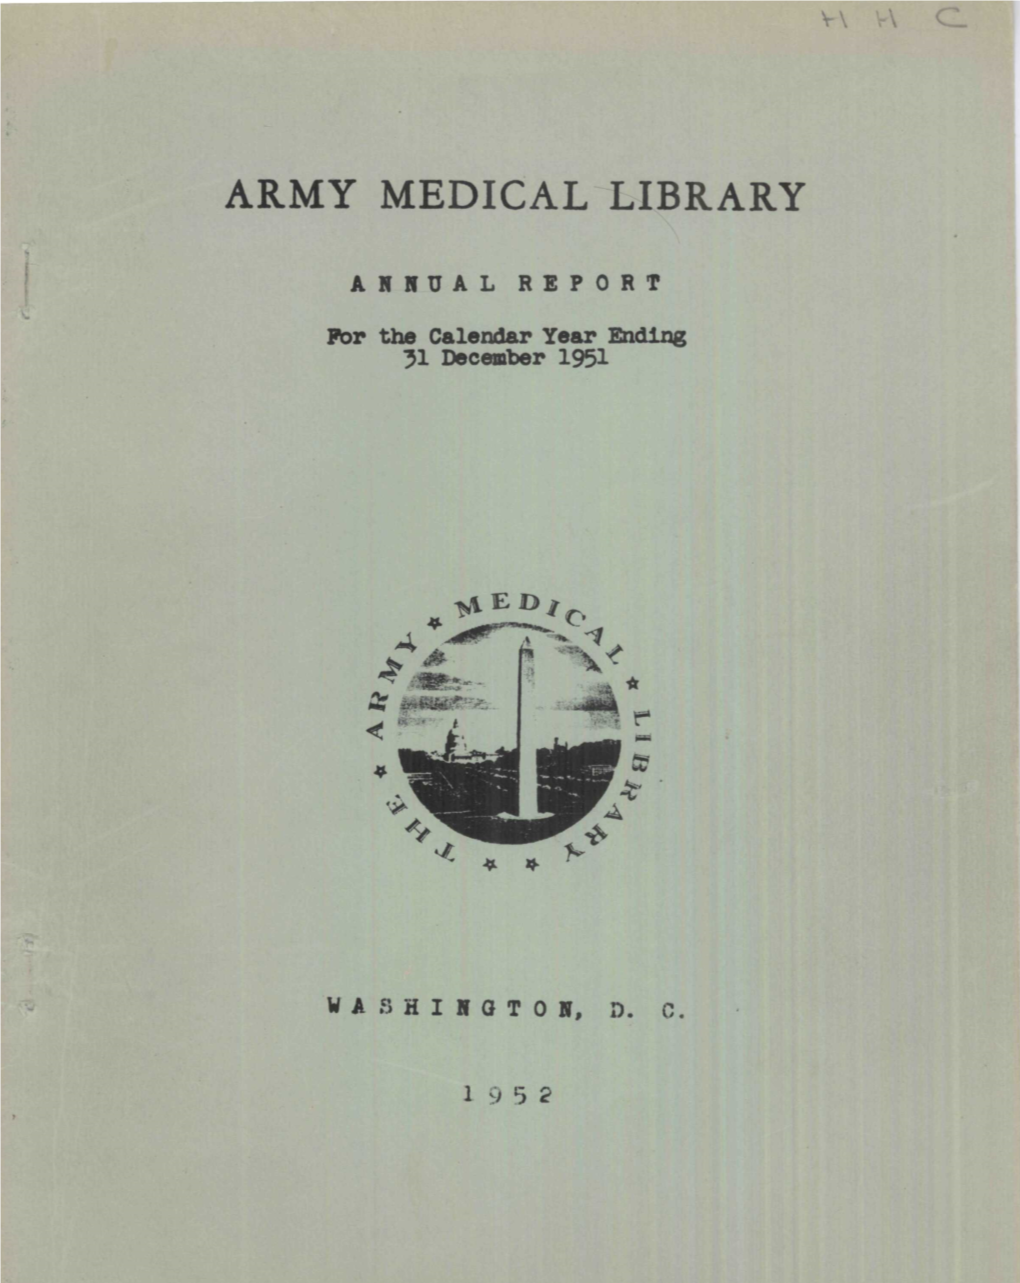 NLM Annual Report of Programs and Services, 1951